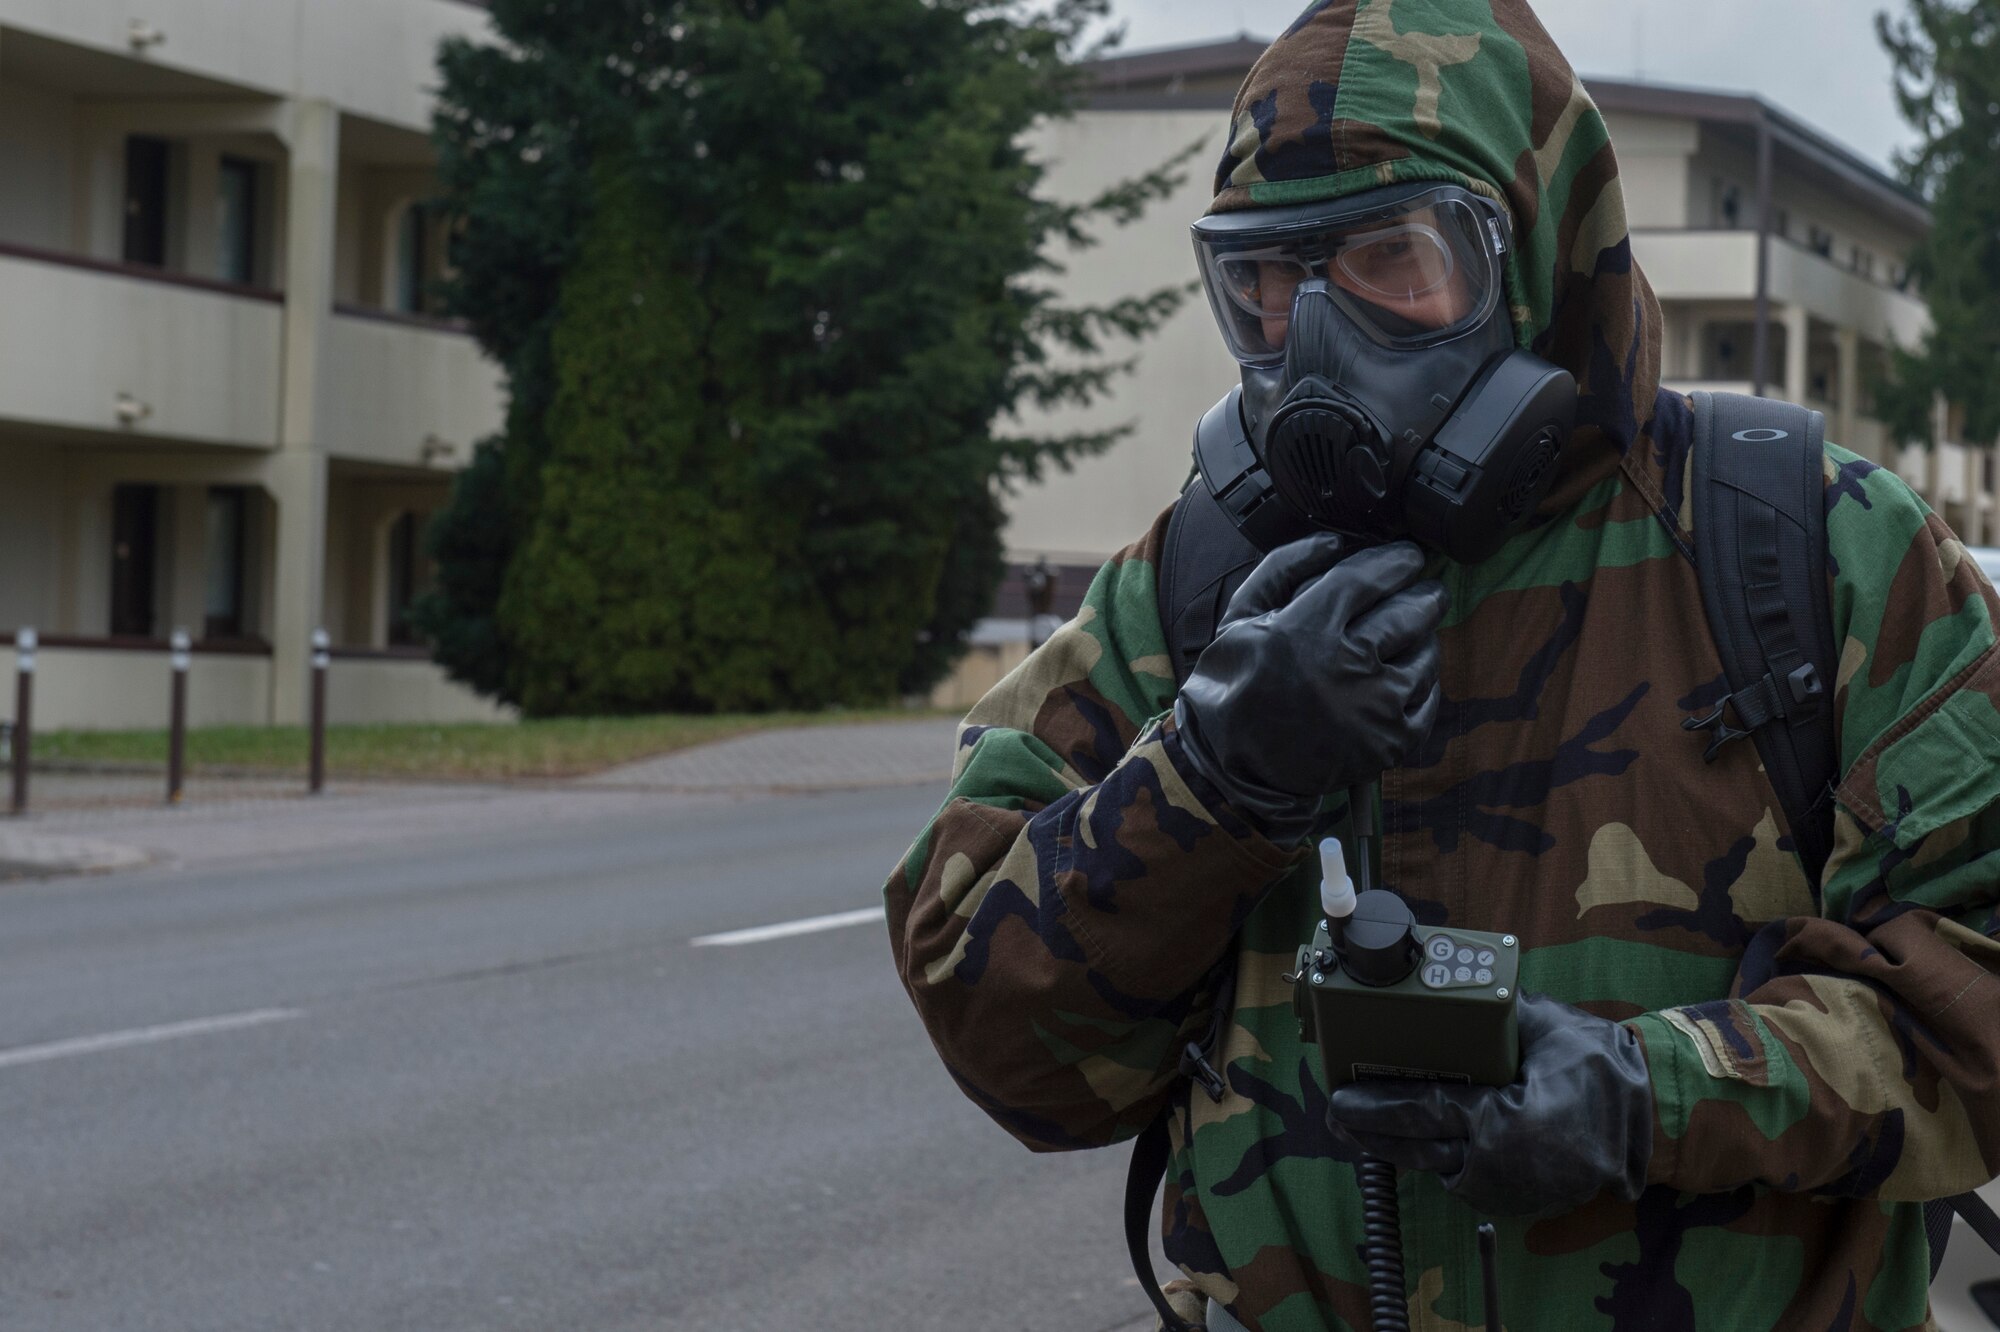 U.S. Air Force Tech. Sgt. Timothy Bennett, 52nd Civil Engineer Squadron post-attack reconnaissance team lead, radios to the chemical, biological, radiological and nuclear defense control center during PAR sweep at Spangdahlem Air Base, Germany, March 15, 2018. CBRN defense protective measures are taken in situations where CBRN warfare hazards may be present. (U.S. Air Force photo by Senior Airman Dawn M. Weber)